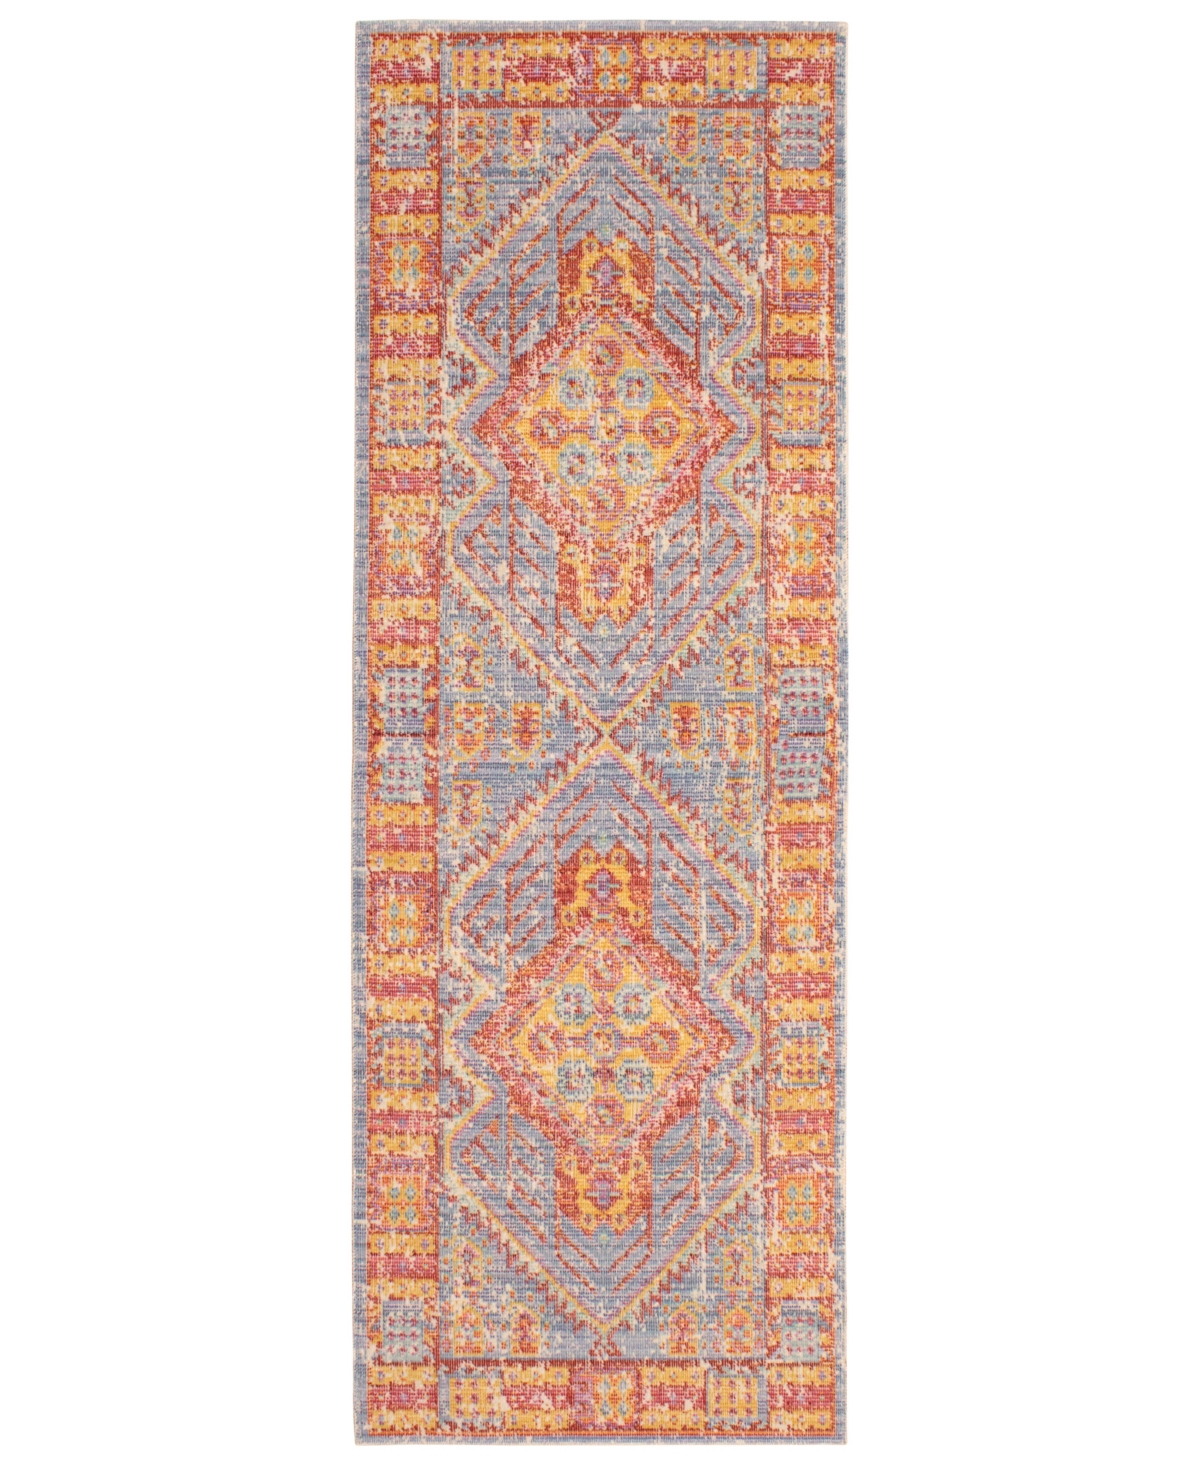 FRENCH CONNECTION MARLEY COLORWASHED KILIM 22" X 61" ACCENT RUG